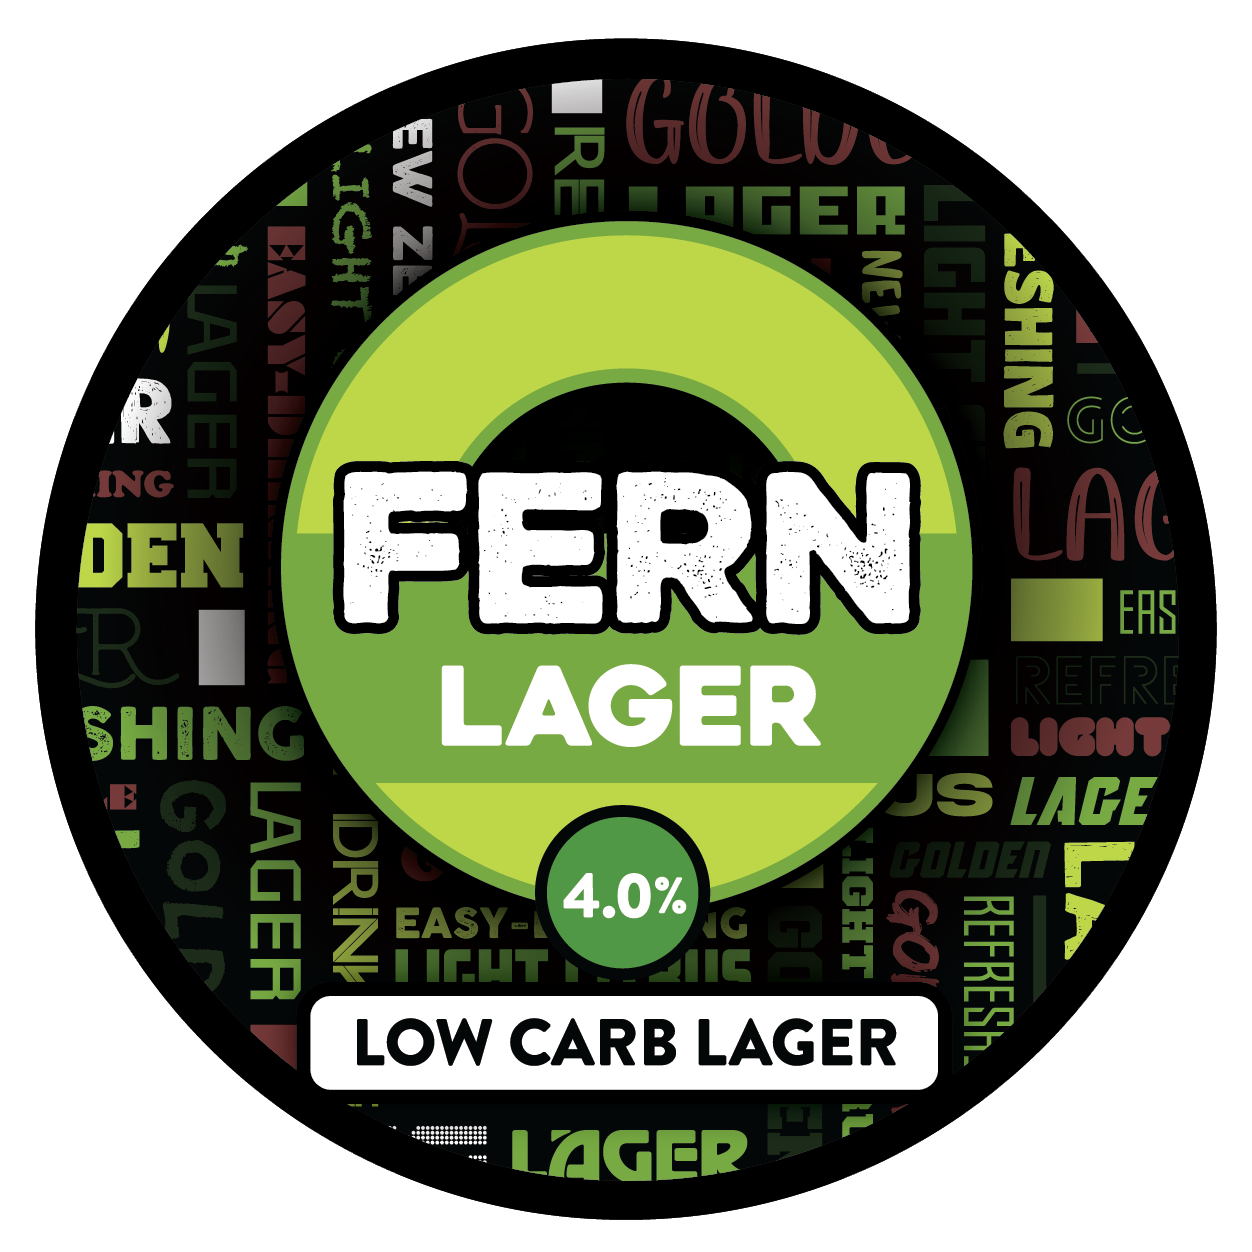 The tap badge for Sprig and Fern's Fern Lager Low Carb Lager craft beer